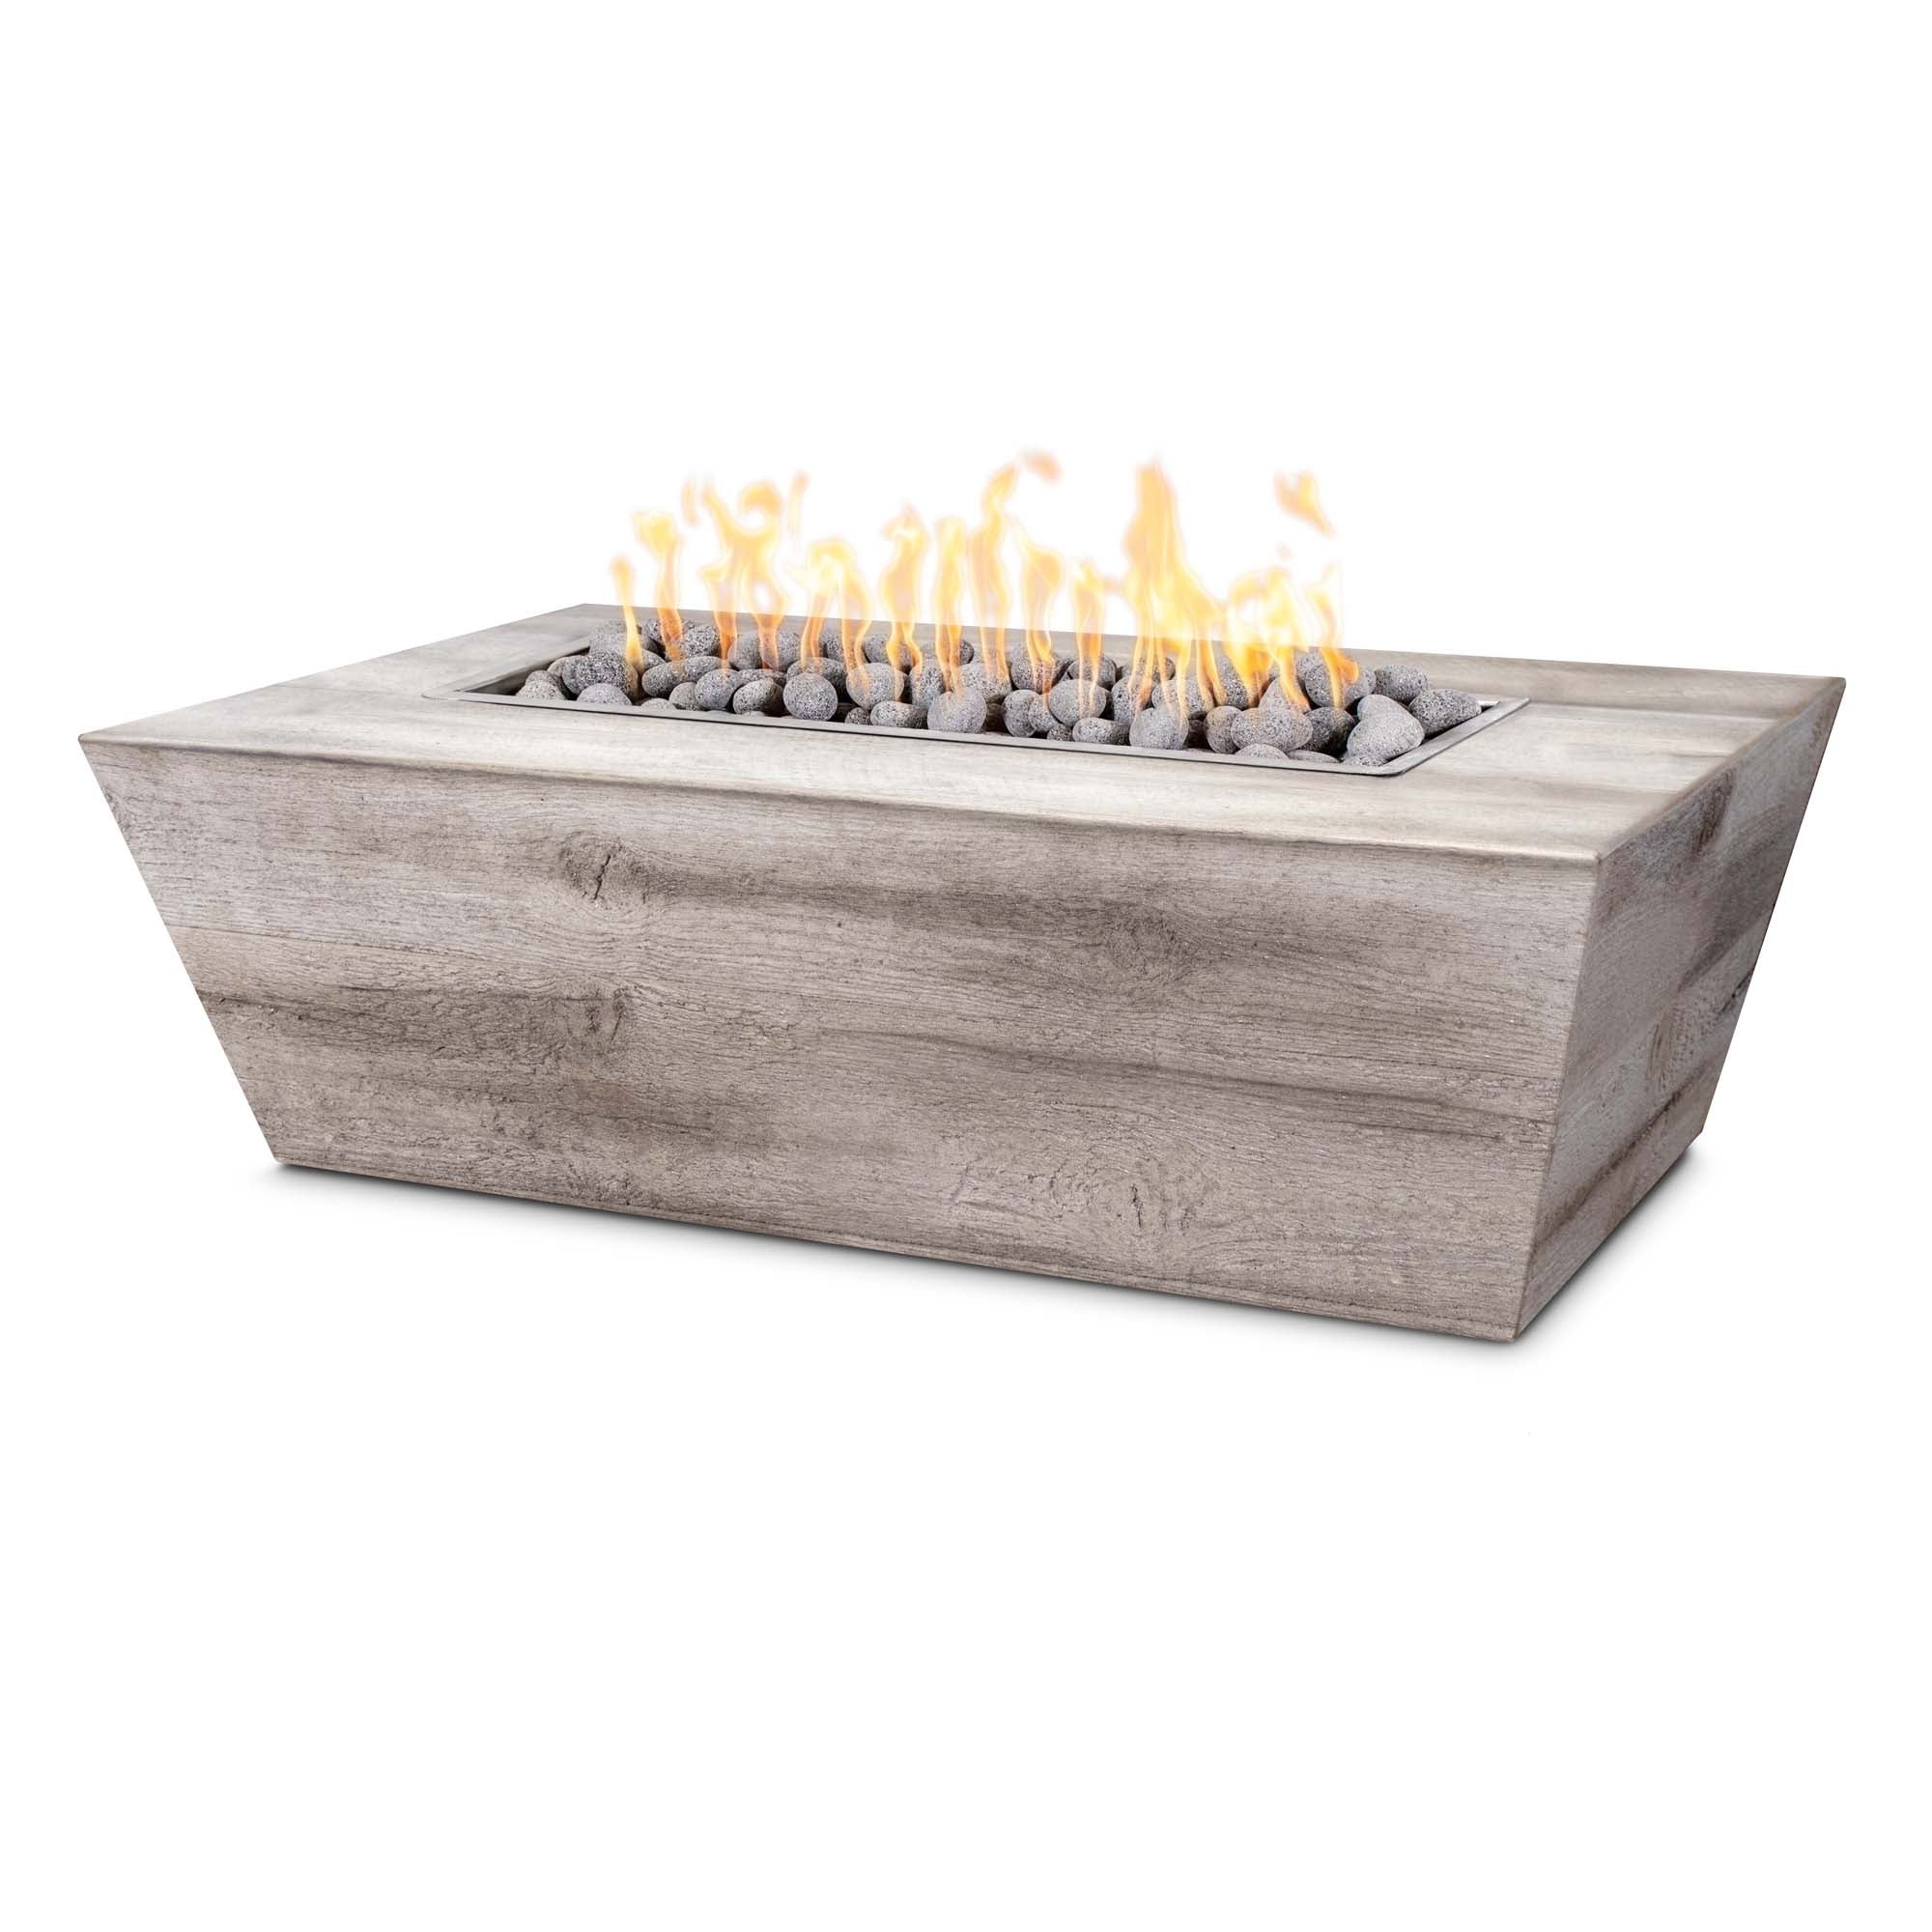 The Outdoor Plus Plymouth Wood Grain Fire Pit